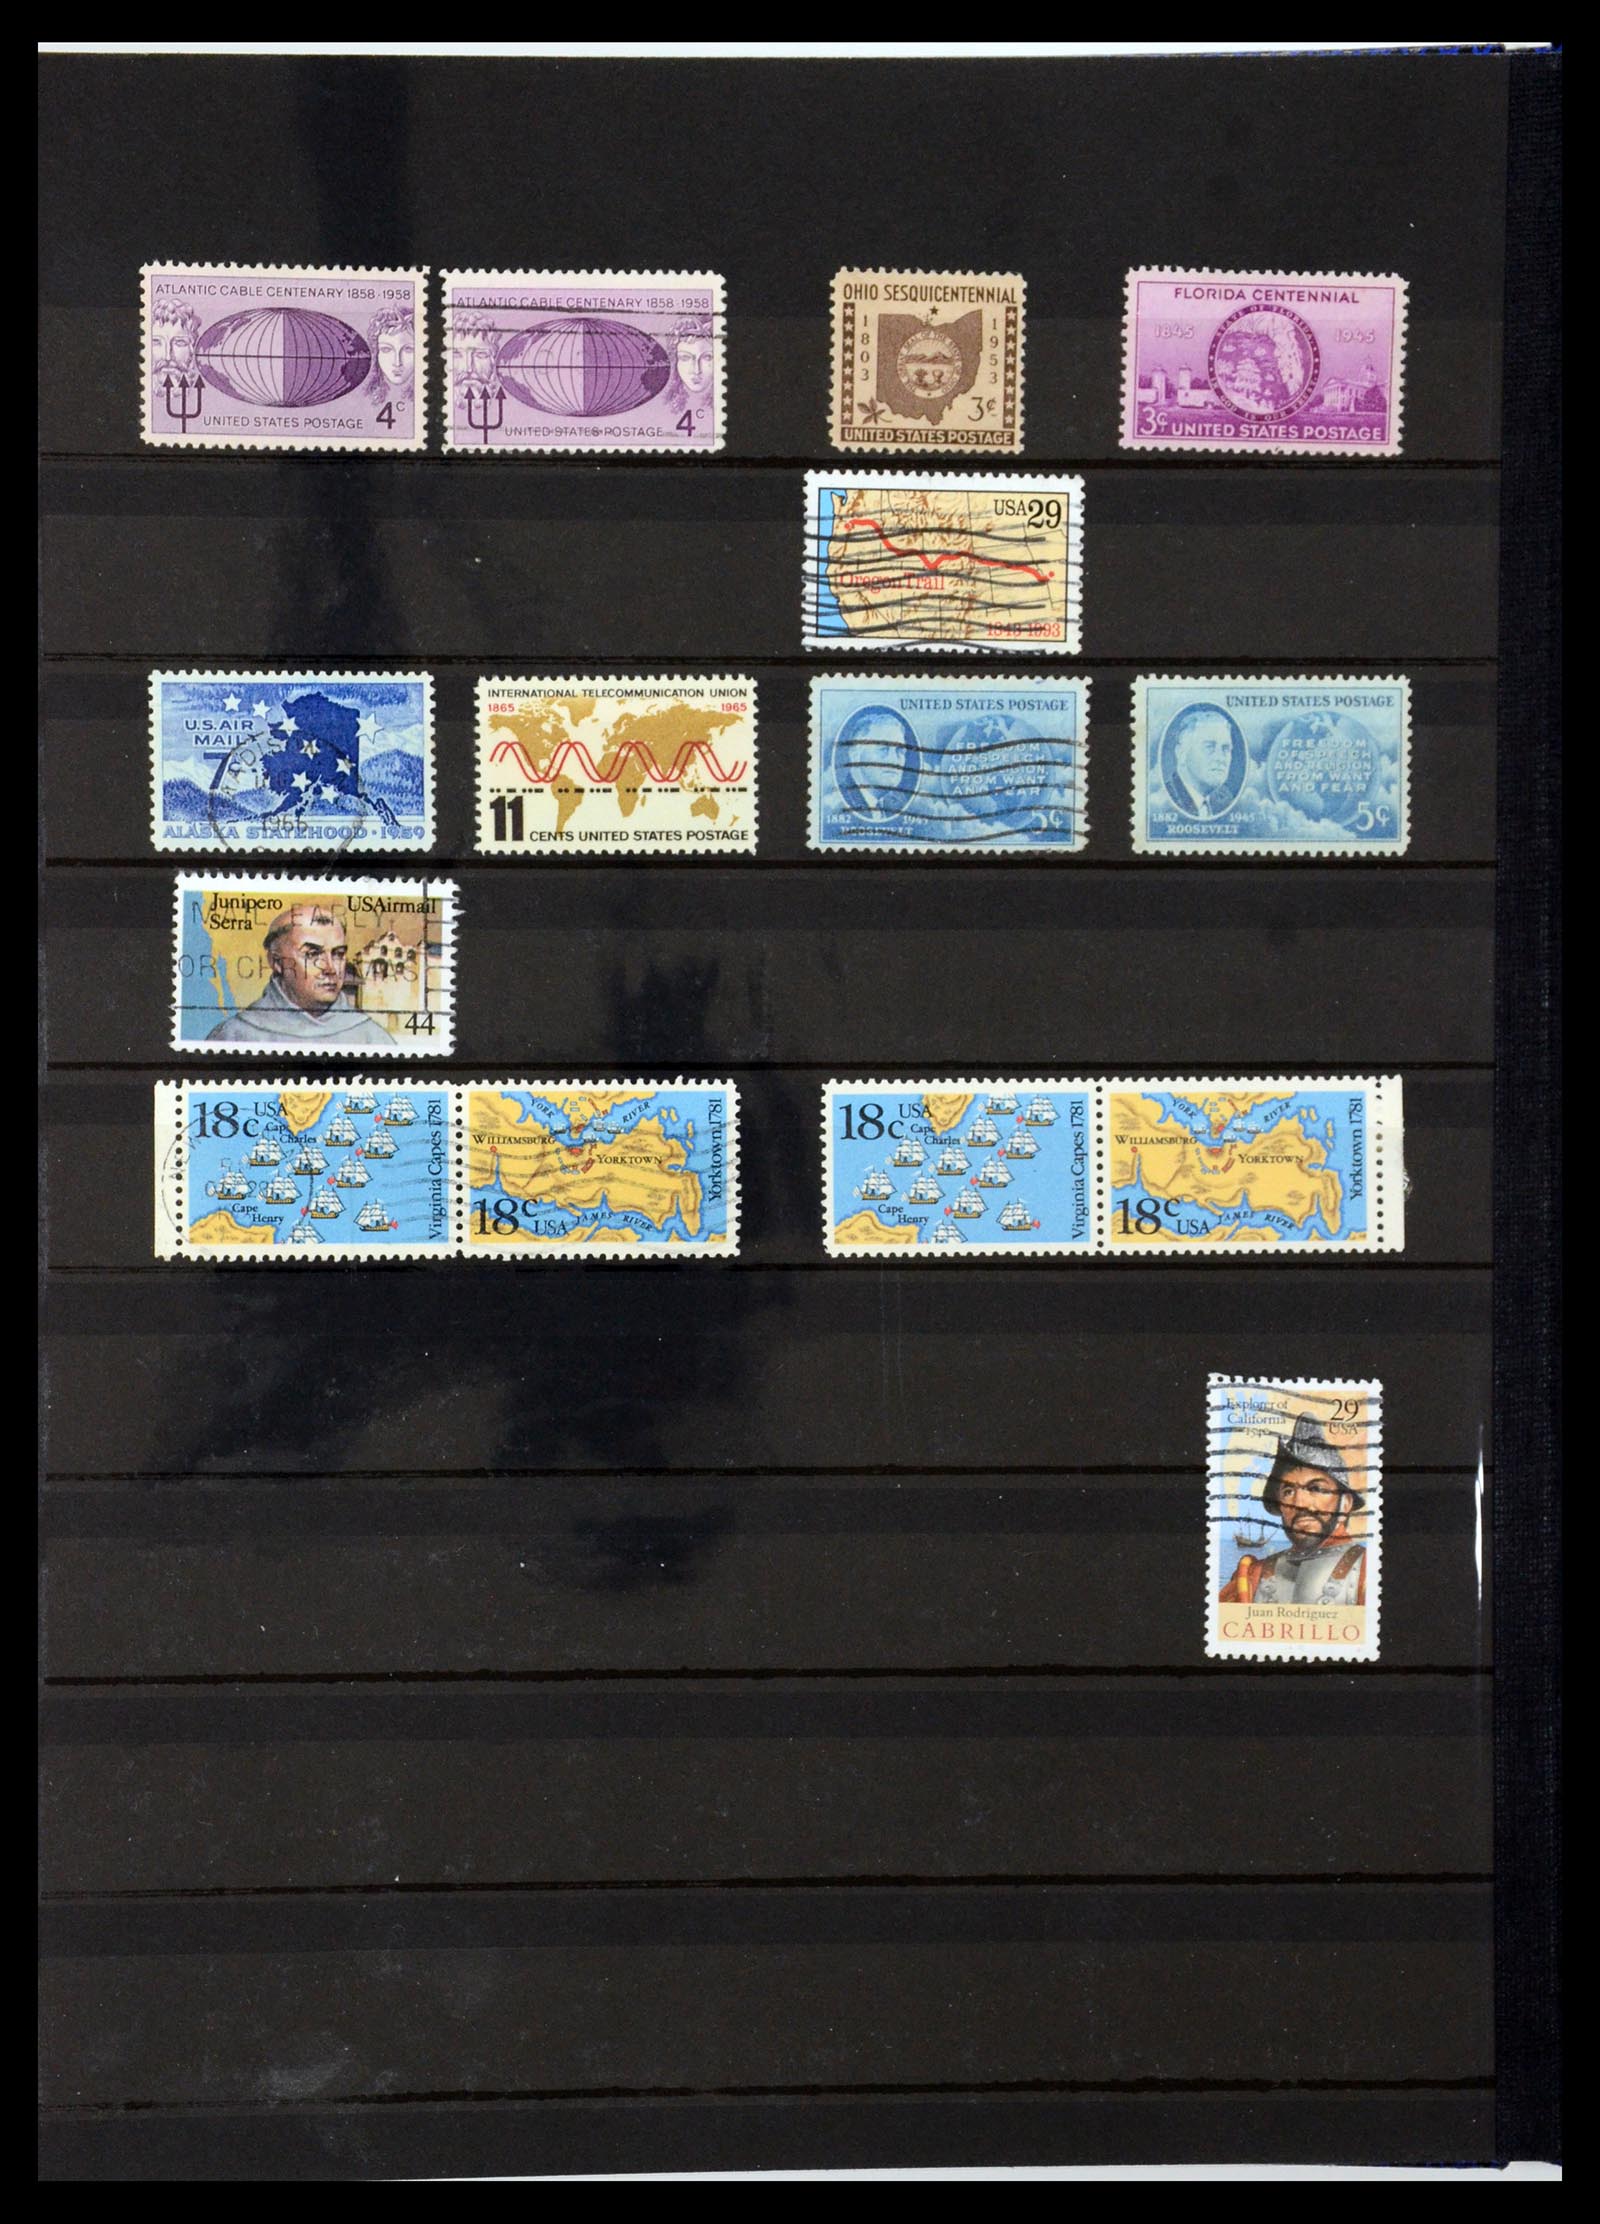 36238 320 - Stamp collection 36238 Motif maps 1900-2000.